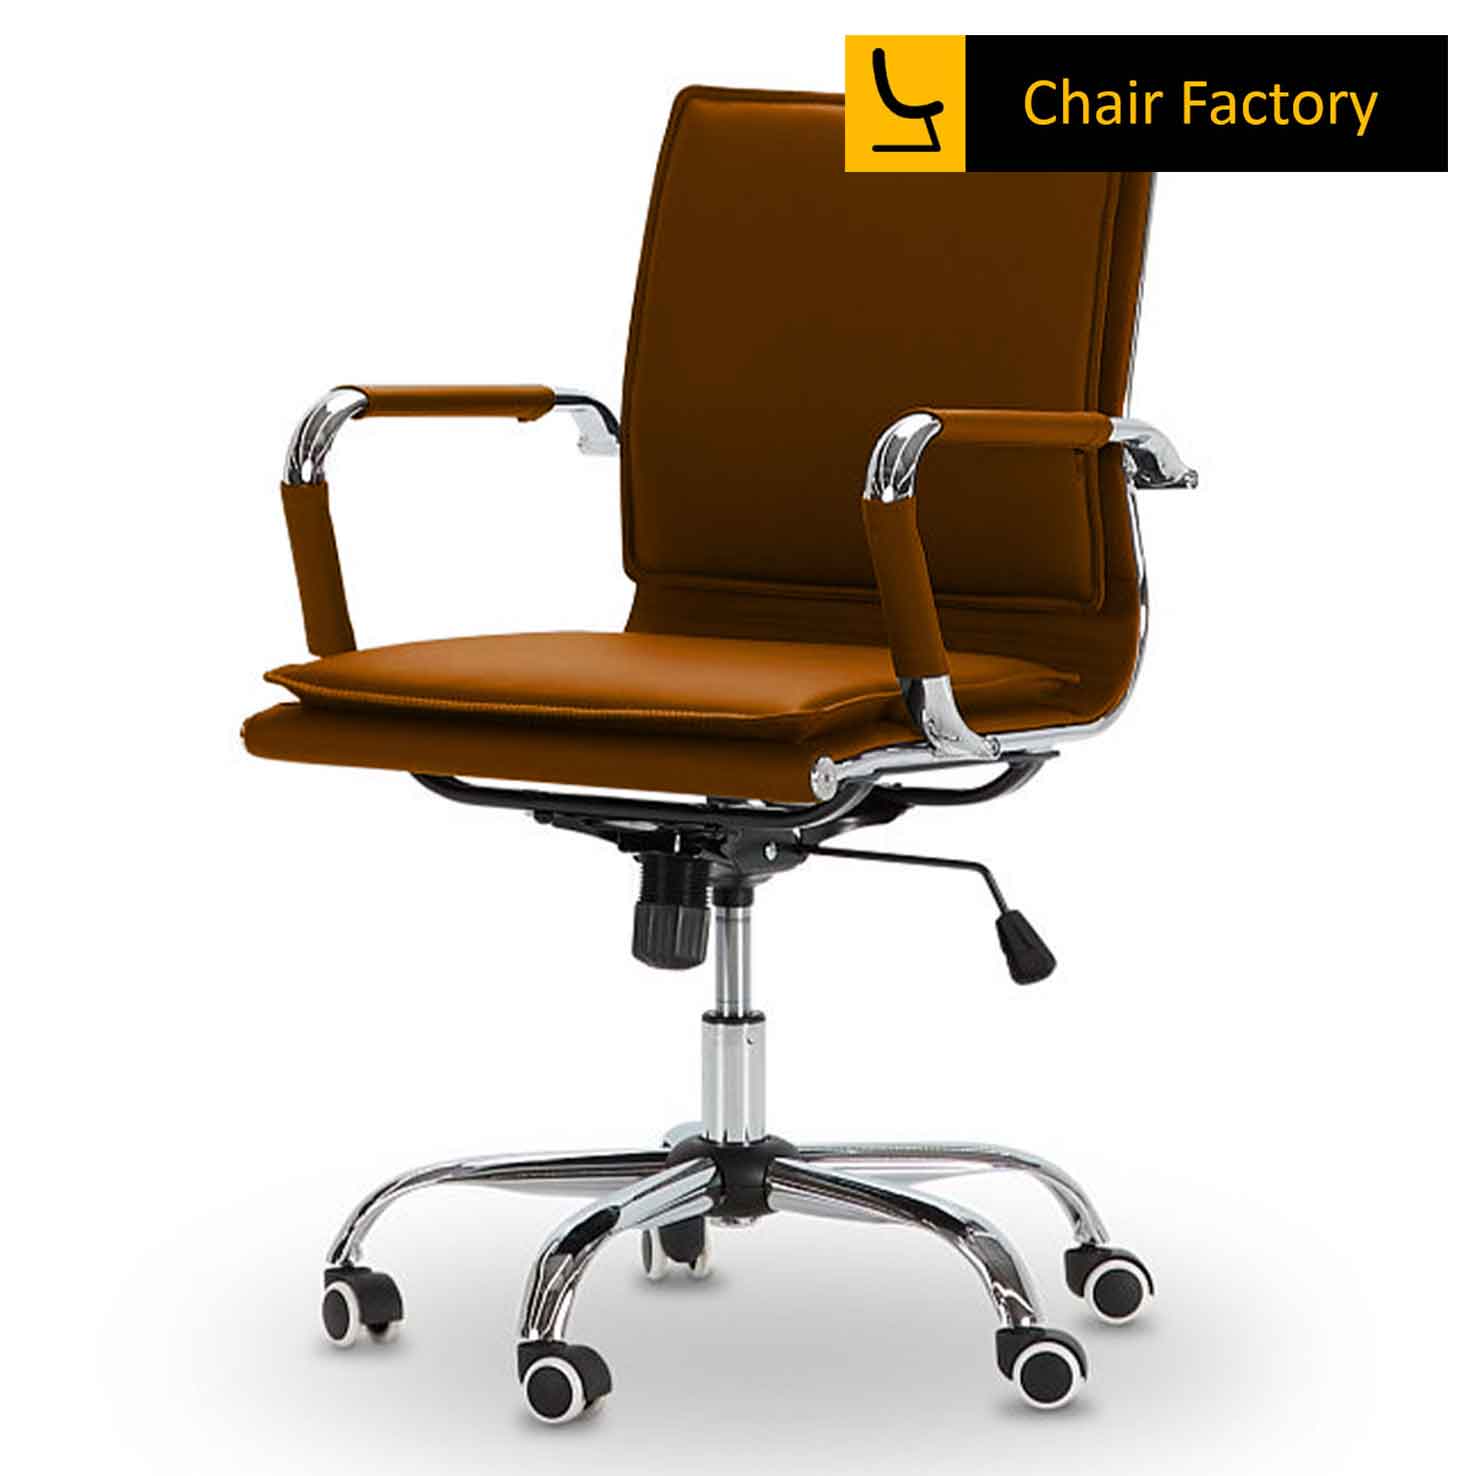 James Double Cushion Tan Mid Back Conference Room Chair 